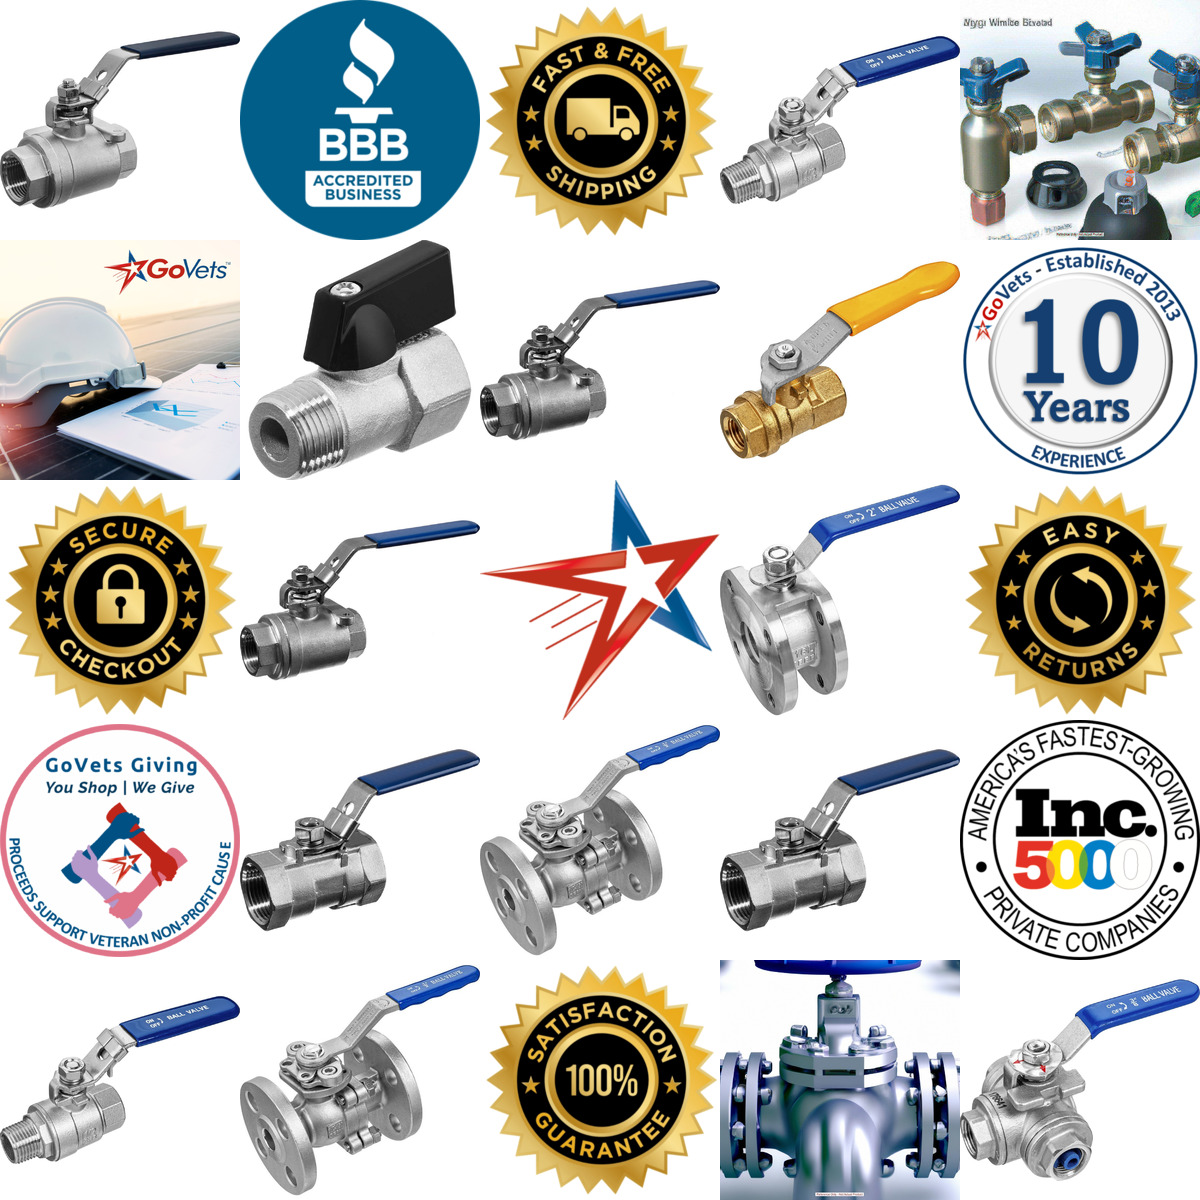 A selection of Pipe Fittings products on GoVets